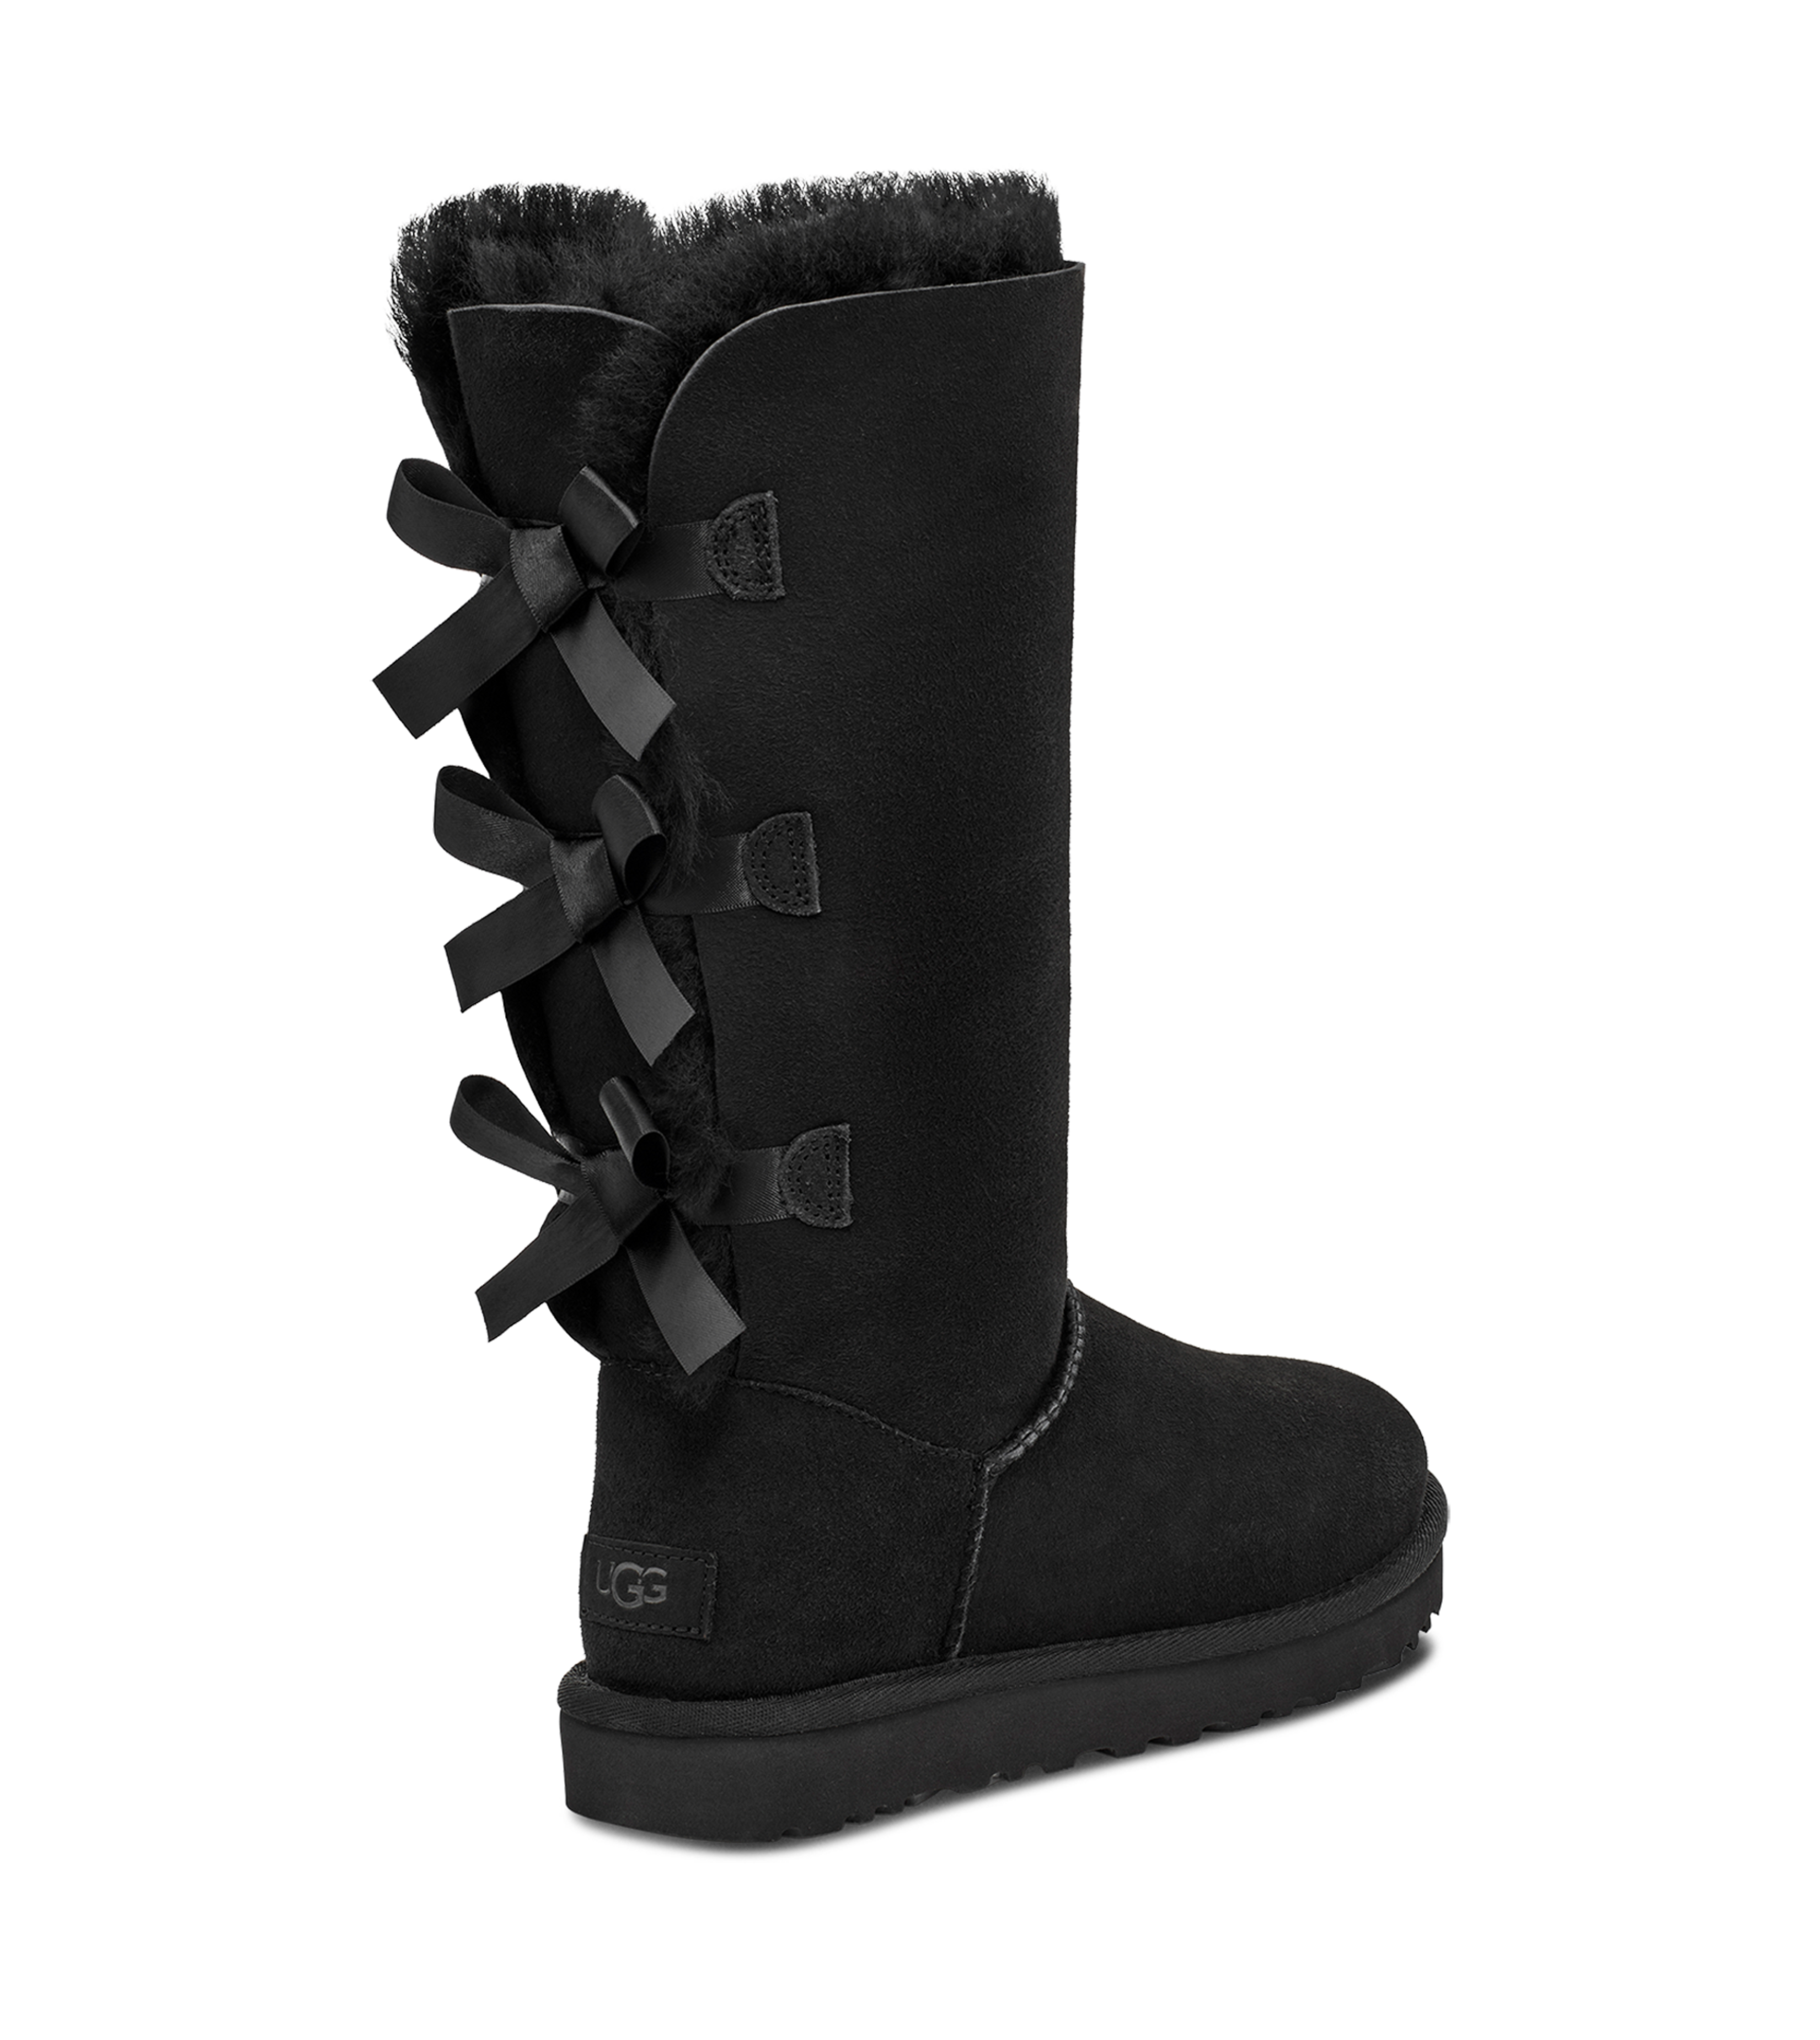 Women's Bailey Bow Tall II Boot | UGG® Official